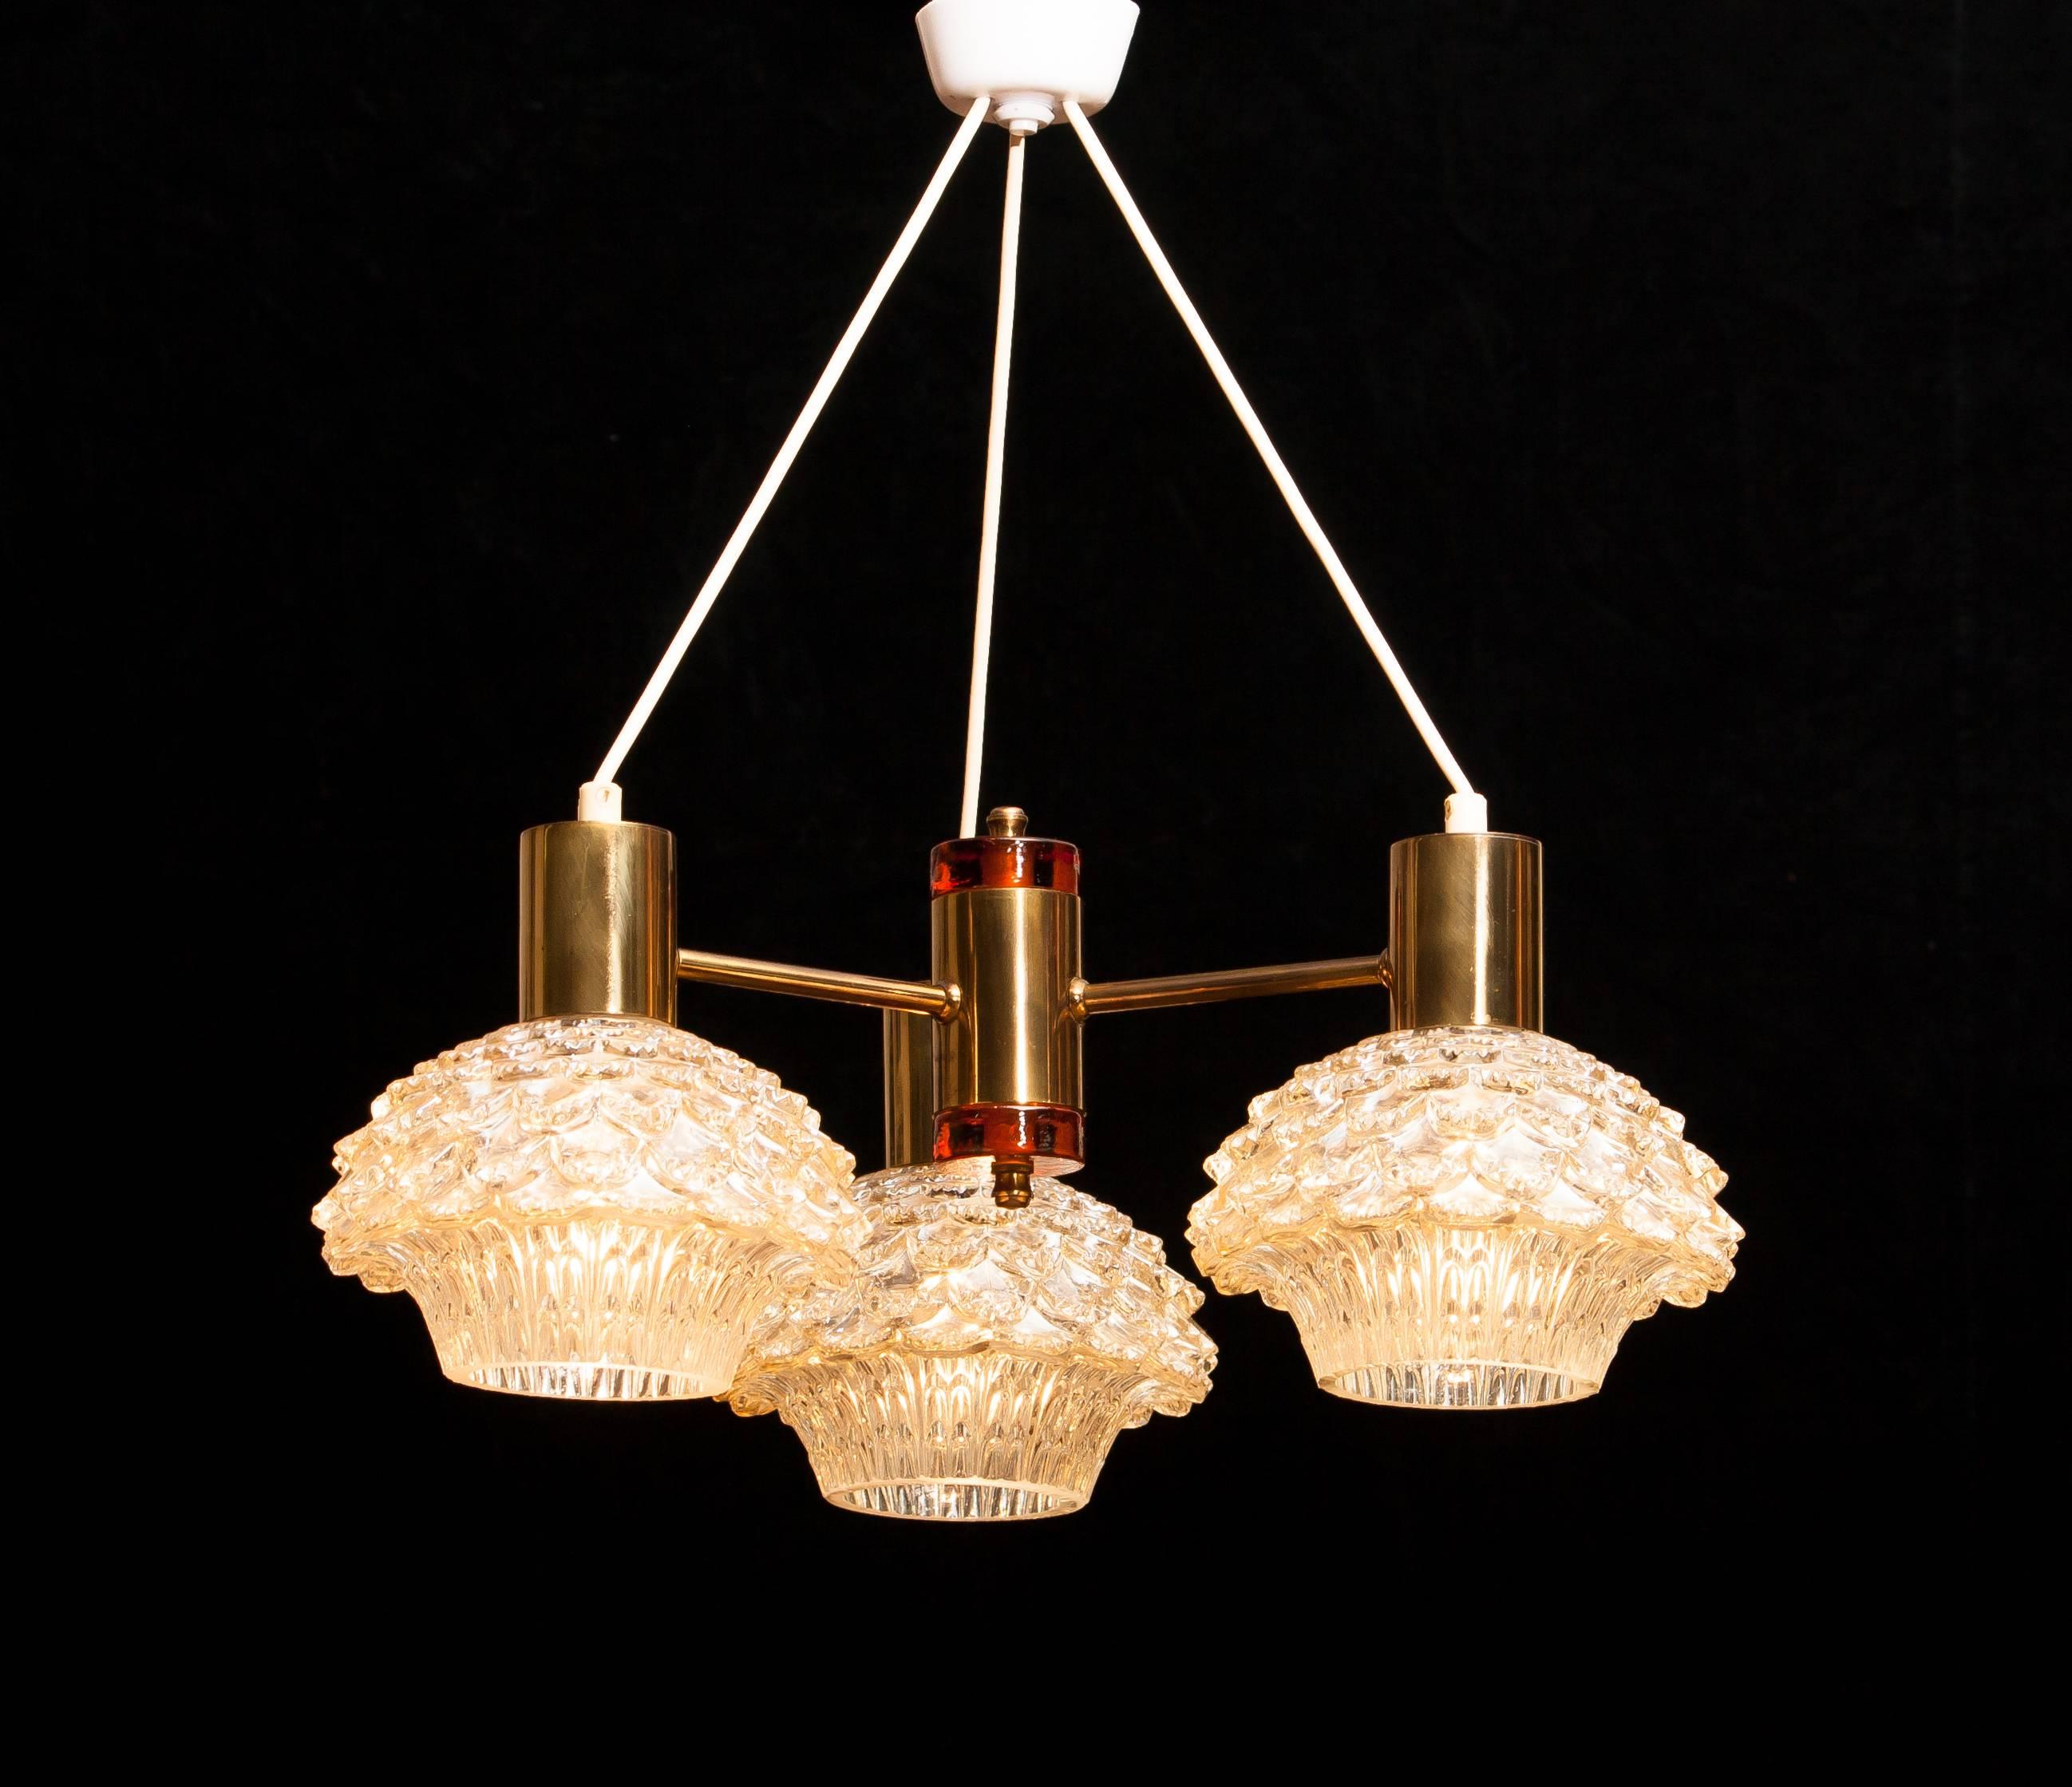 Beautiful chandelier designed by Carl Fagerlund for Orrefors, Sweden.
This lamp has three brass arms with amazing glass shades.
In the middle a brass cillinder with on the top and bottom an amber glass element.
It is in a very nice